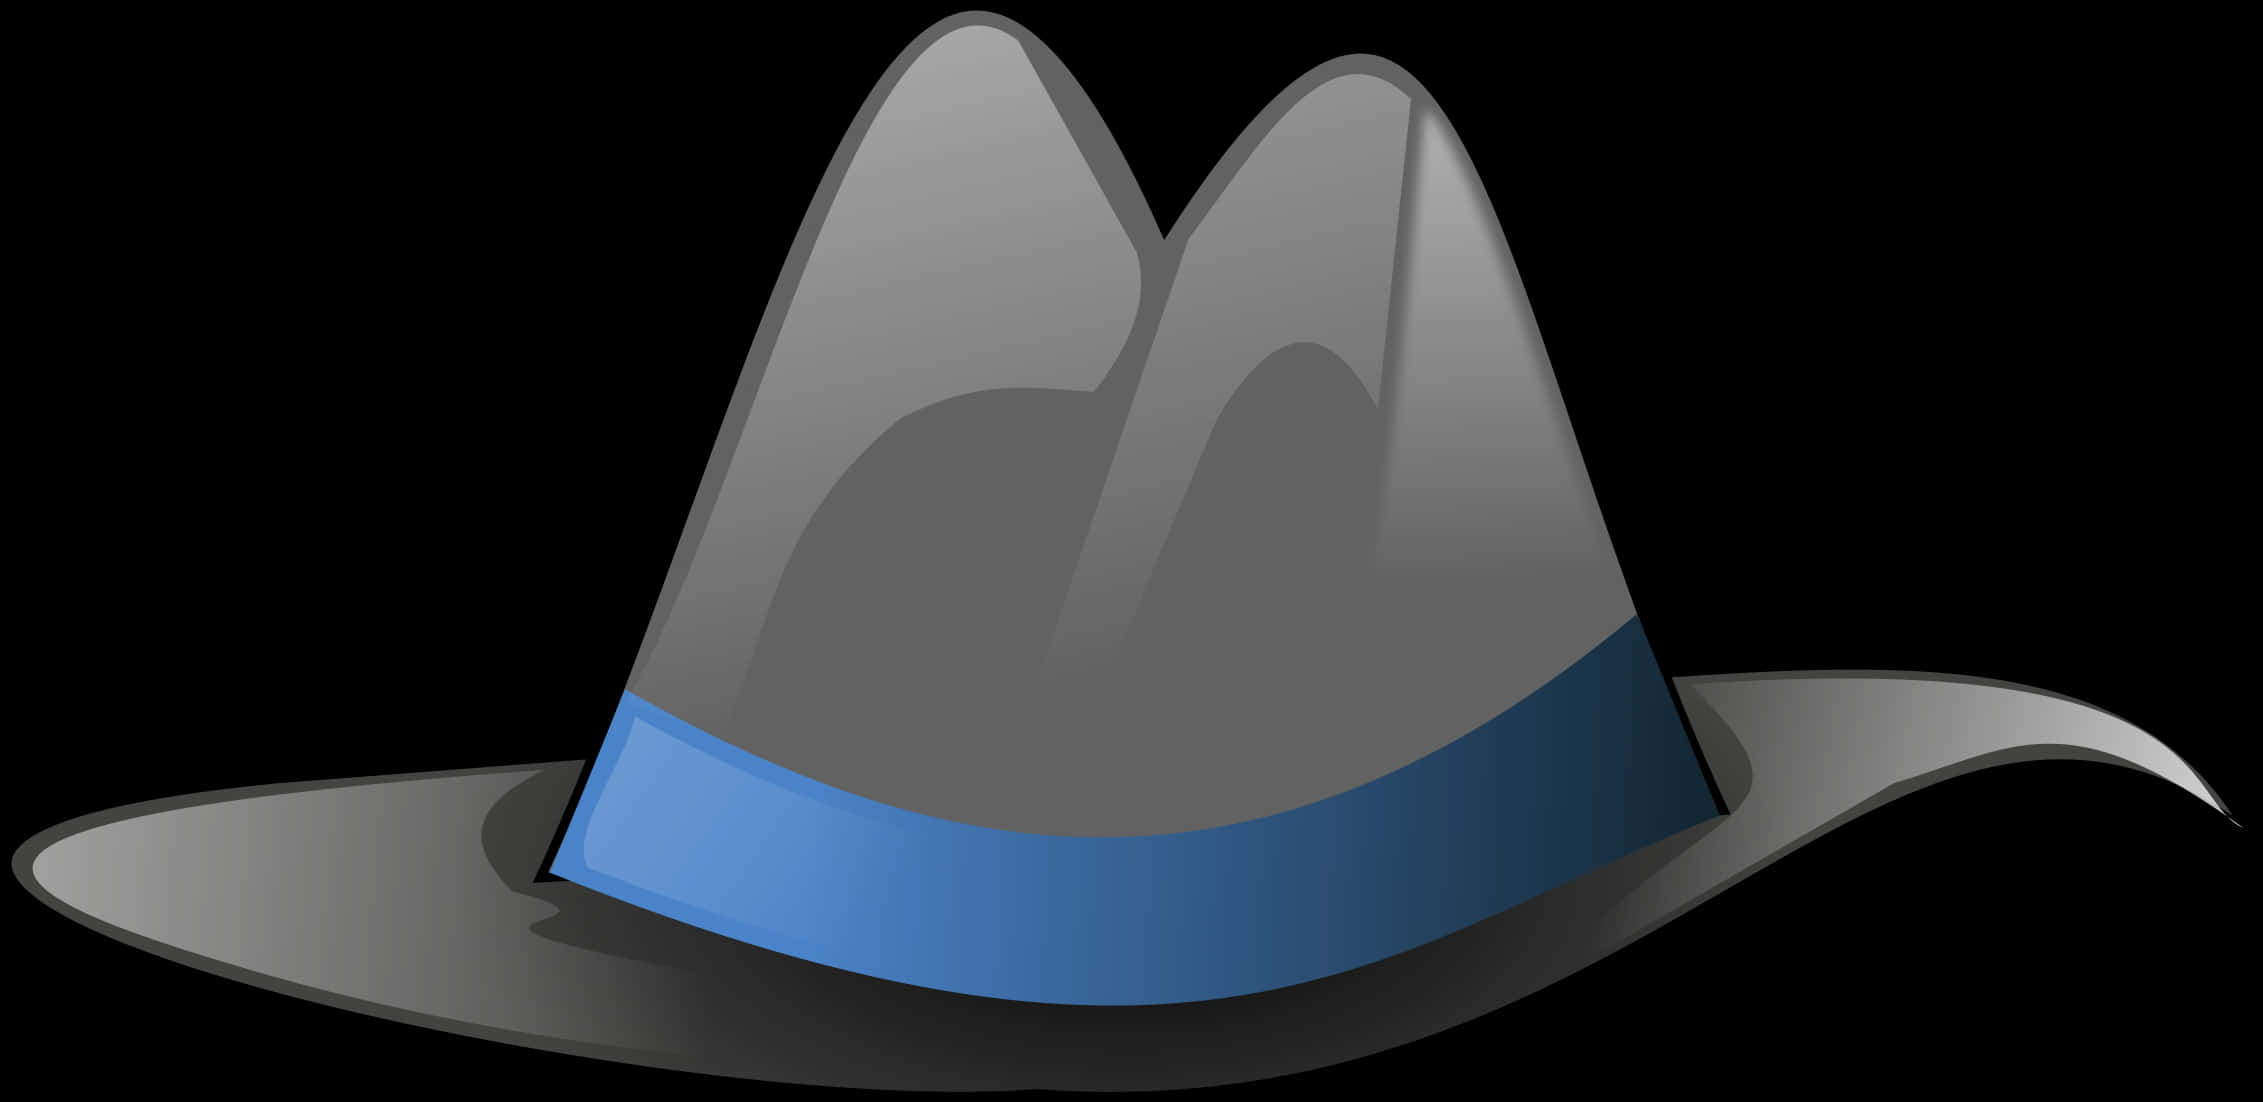 A Hat With A Blue Band